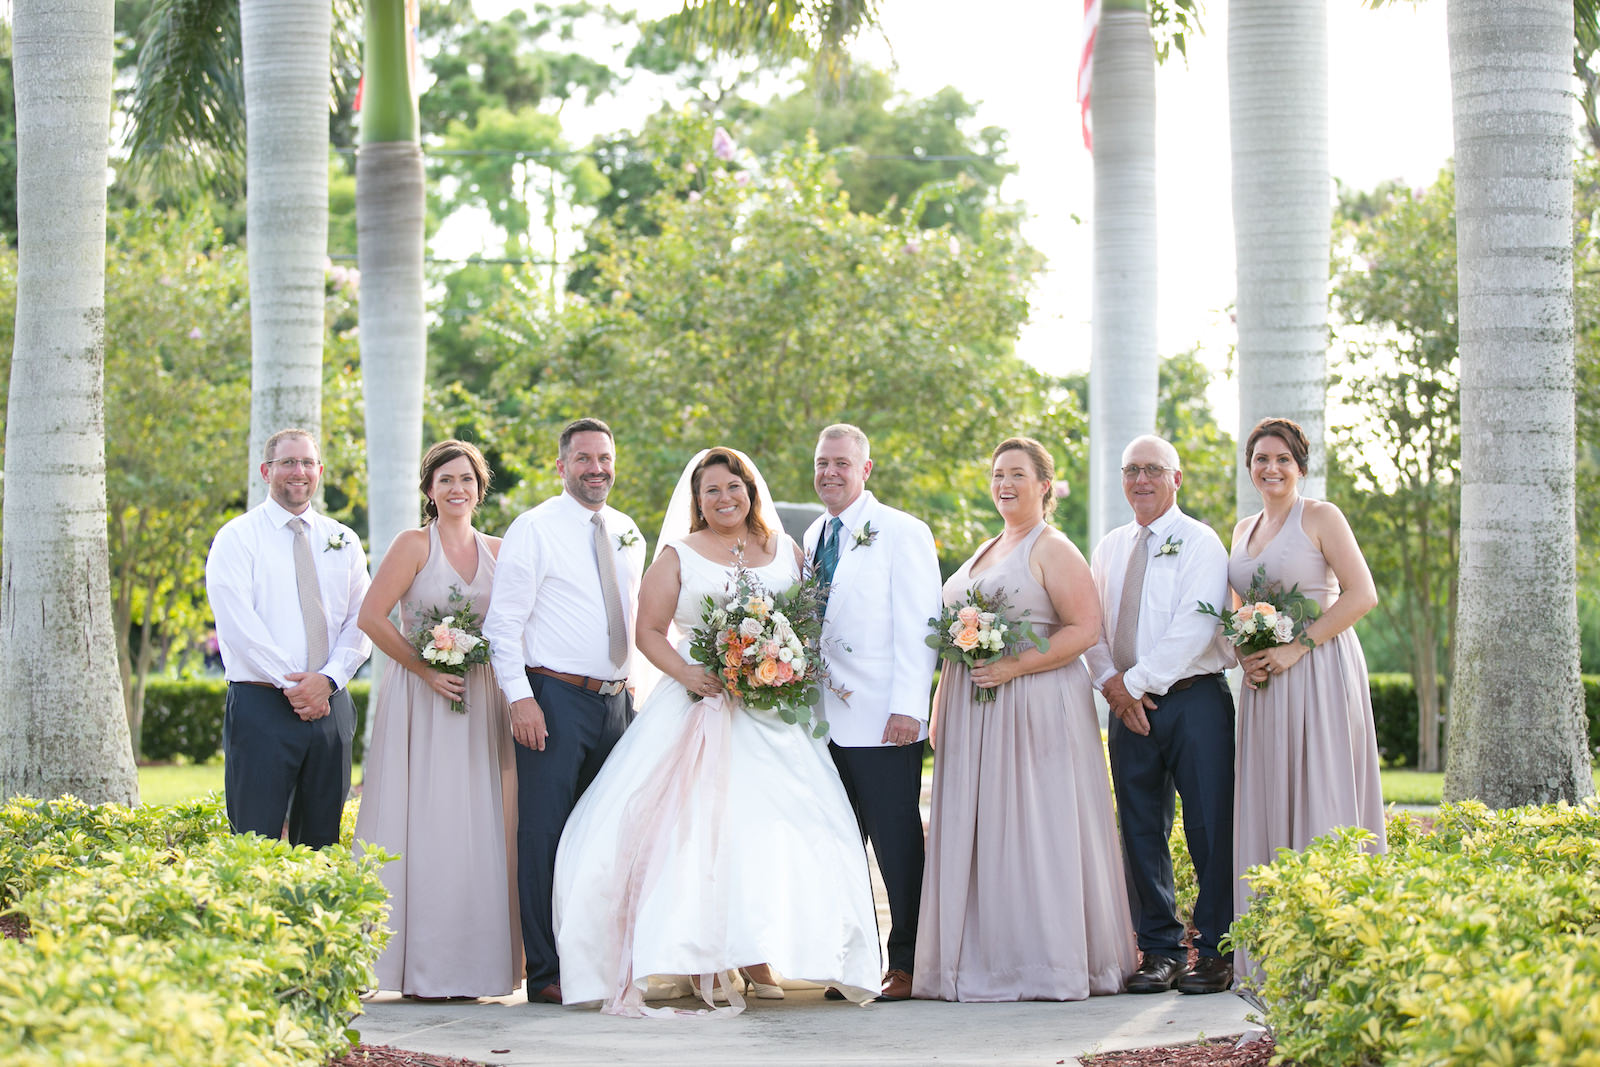 Tampa Bay Bride Holding Spring Color Floral Bouquet, Groom in White Suit, Bridesmaids in Biscotti Matching Dresses, Groomsmen Wedding Portrait | Wedding Photographer Carrie Wildes Photography | Wedding Dress Truly Forever Bridal | Wedding Hair and Makeup Michele Renee the Studio